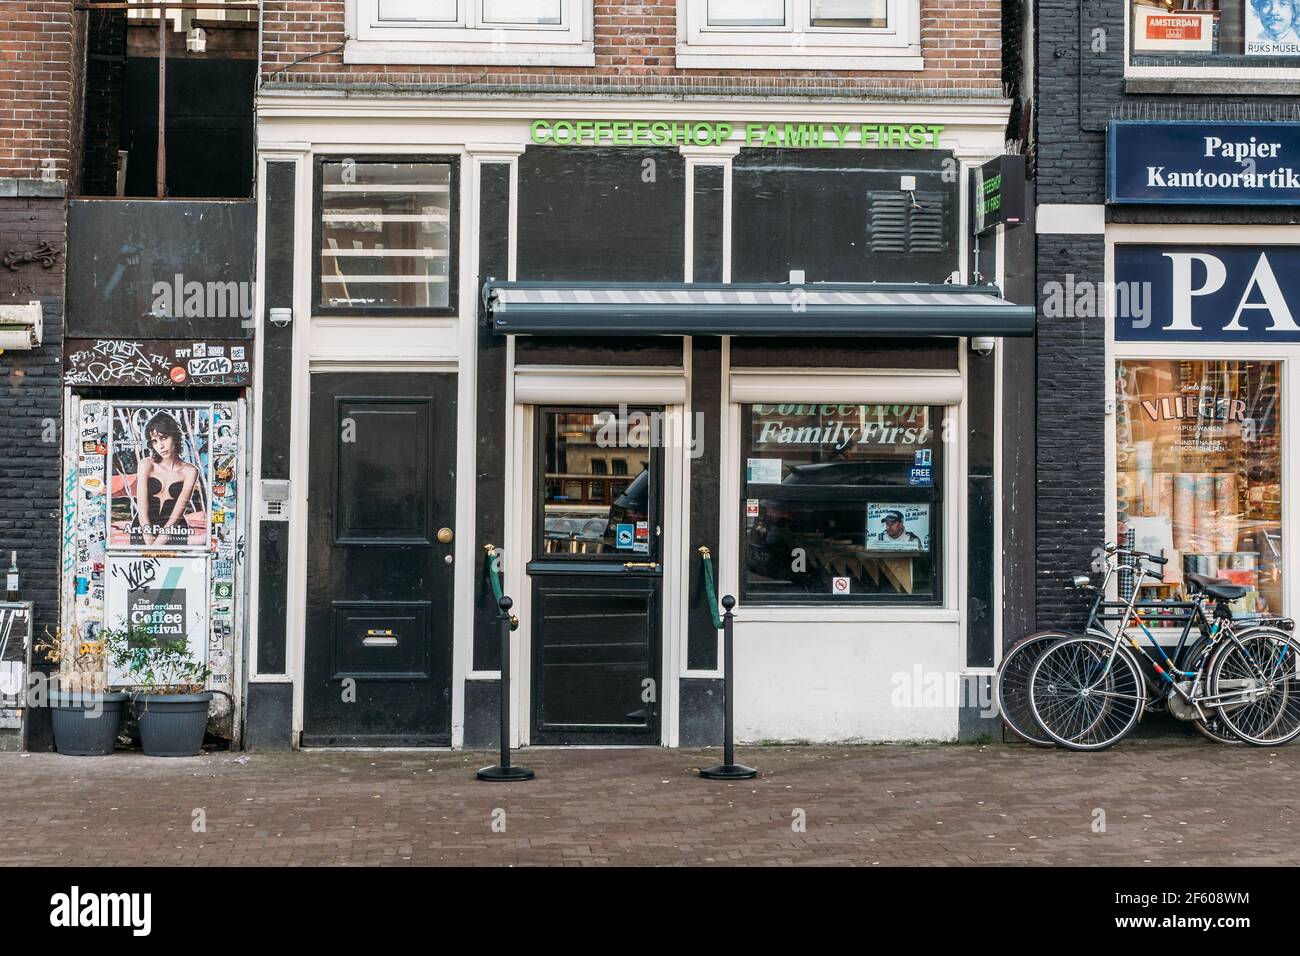 AMSTERDAM, NETHERLANDS - March 2020: Amsterdam coffee shop, special market for trading Cannabis or hemp, Netherlands. Stock Photo